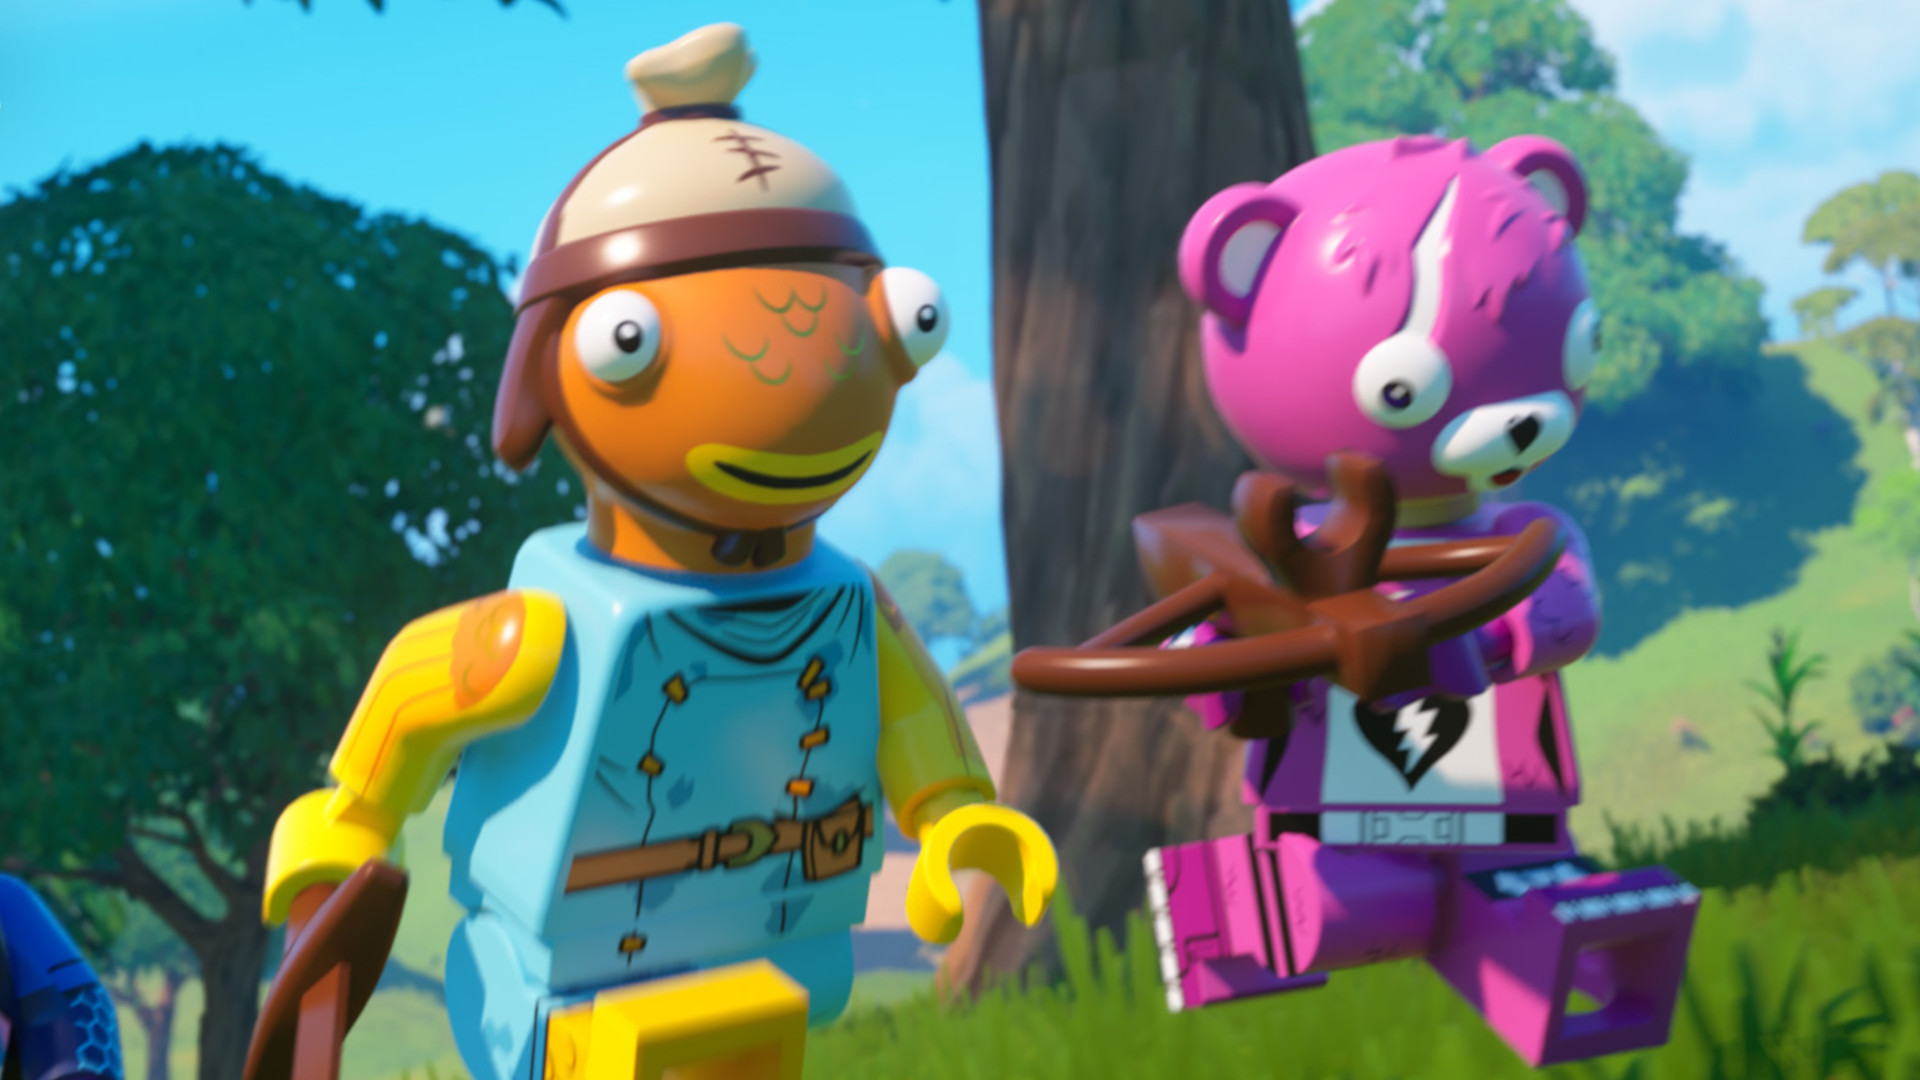 Does Lego Fortnite Support Split-Screen Co-Op? Answered